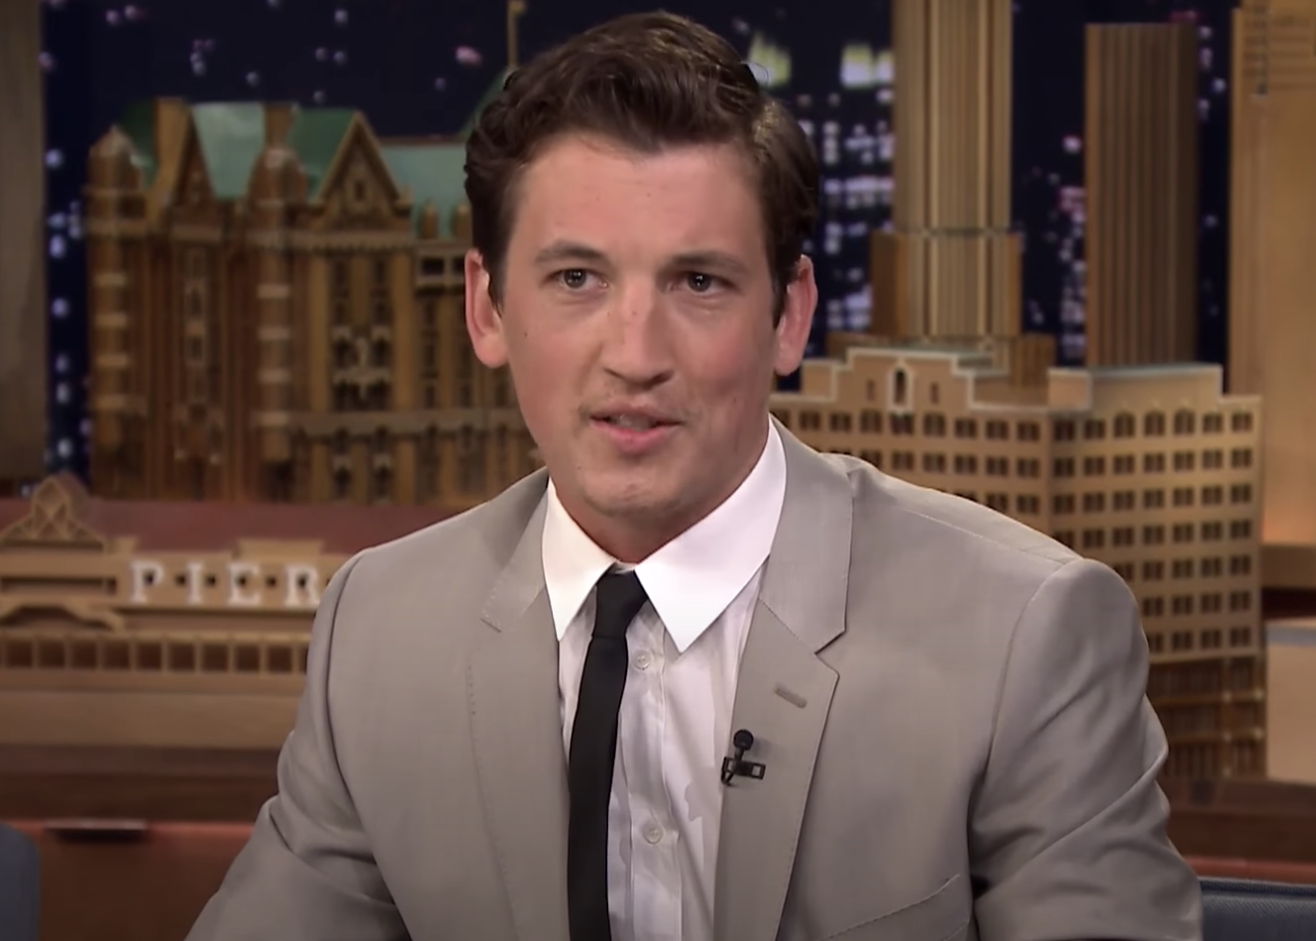 Miles Teller on &quot;The Tonight Show starring Jimmy Fallon&quot;